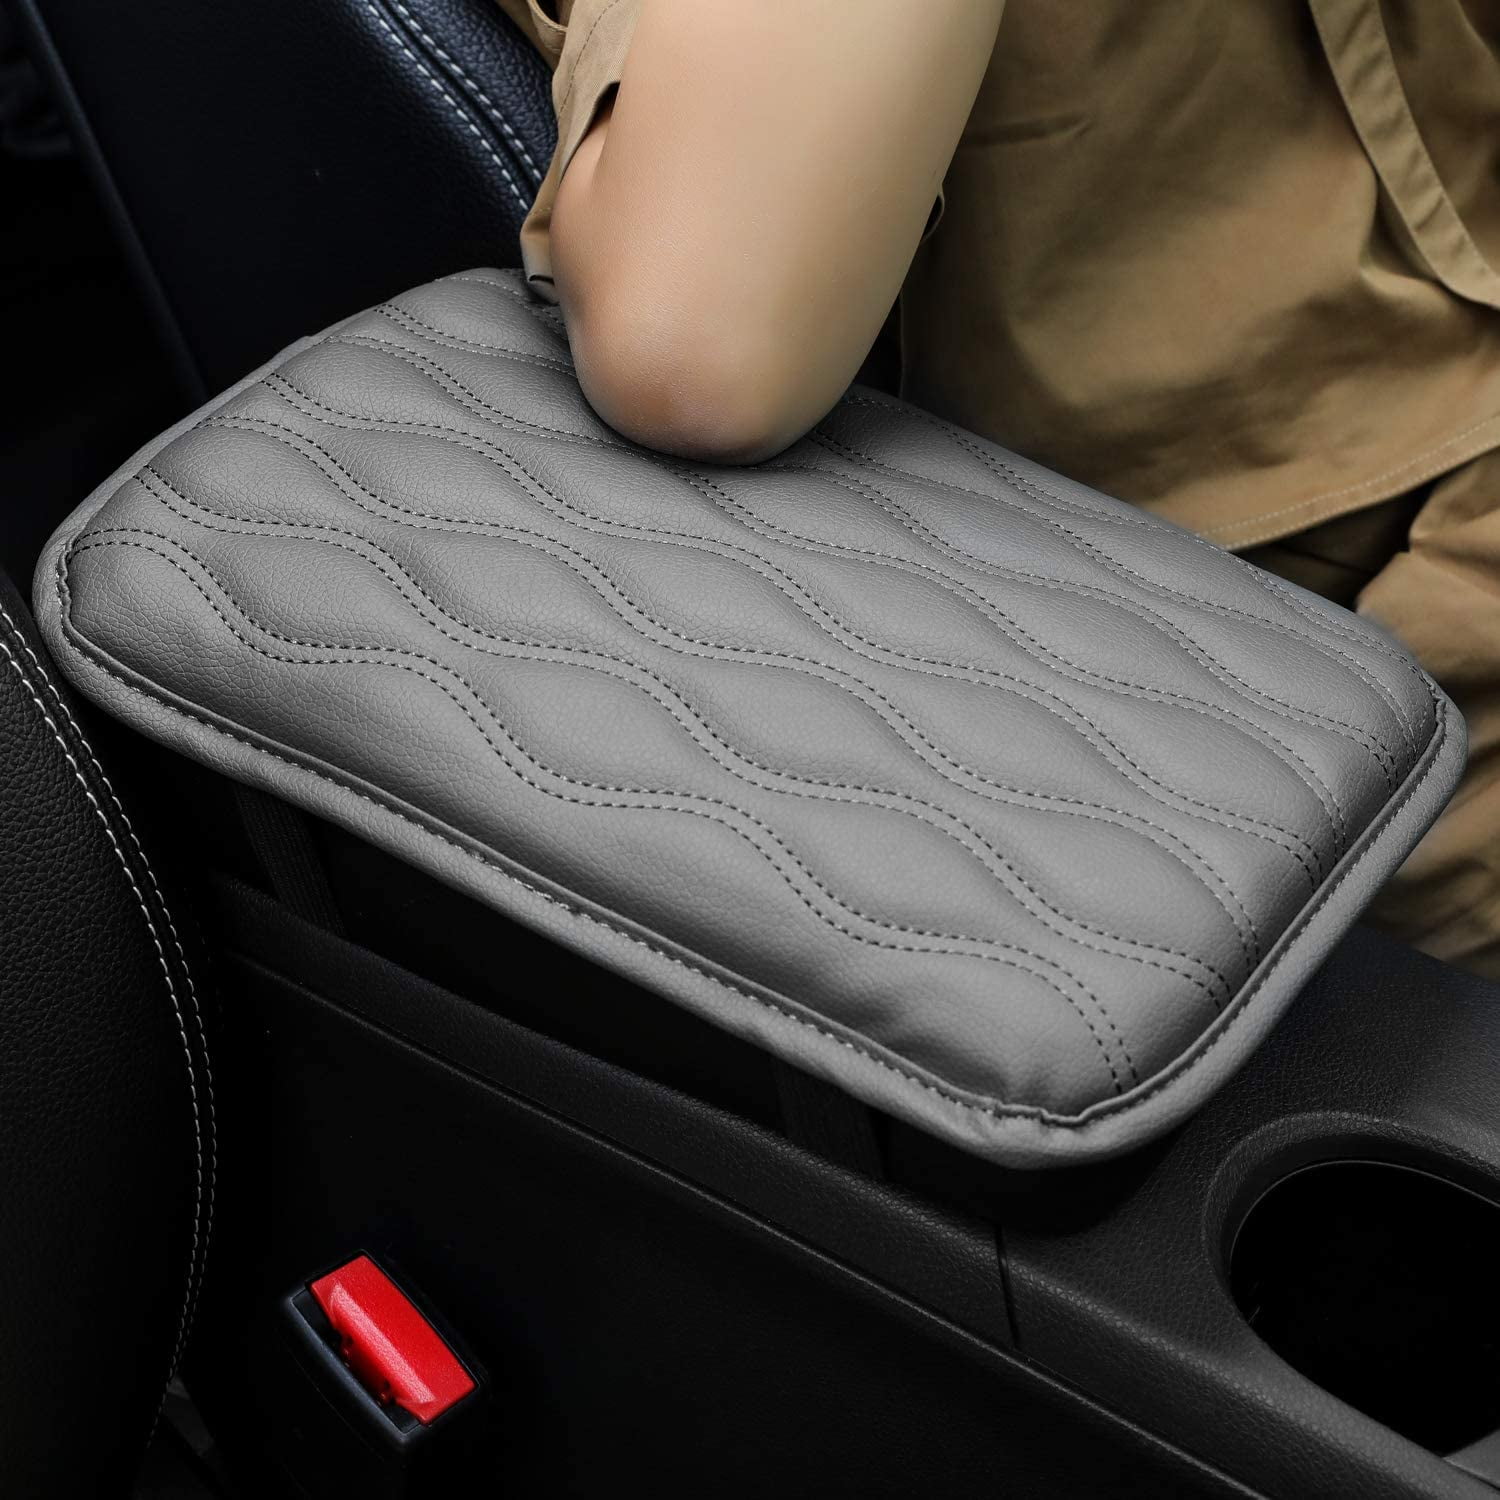 Car Armrest Pad,Car Center Console Cover,Waterproof Center Console Pad,Car armrest Box Pad,Armrest Seat Box Cover Protector,for Most Vehicle Black Car Truck SUV 